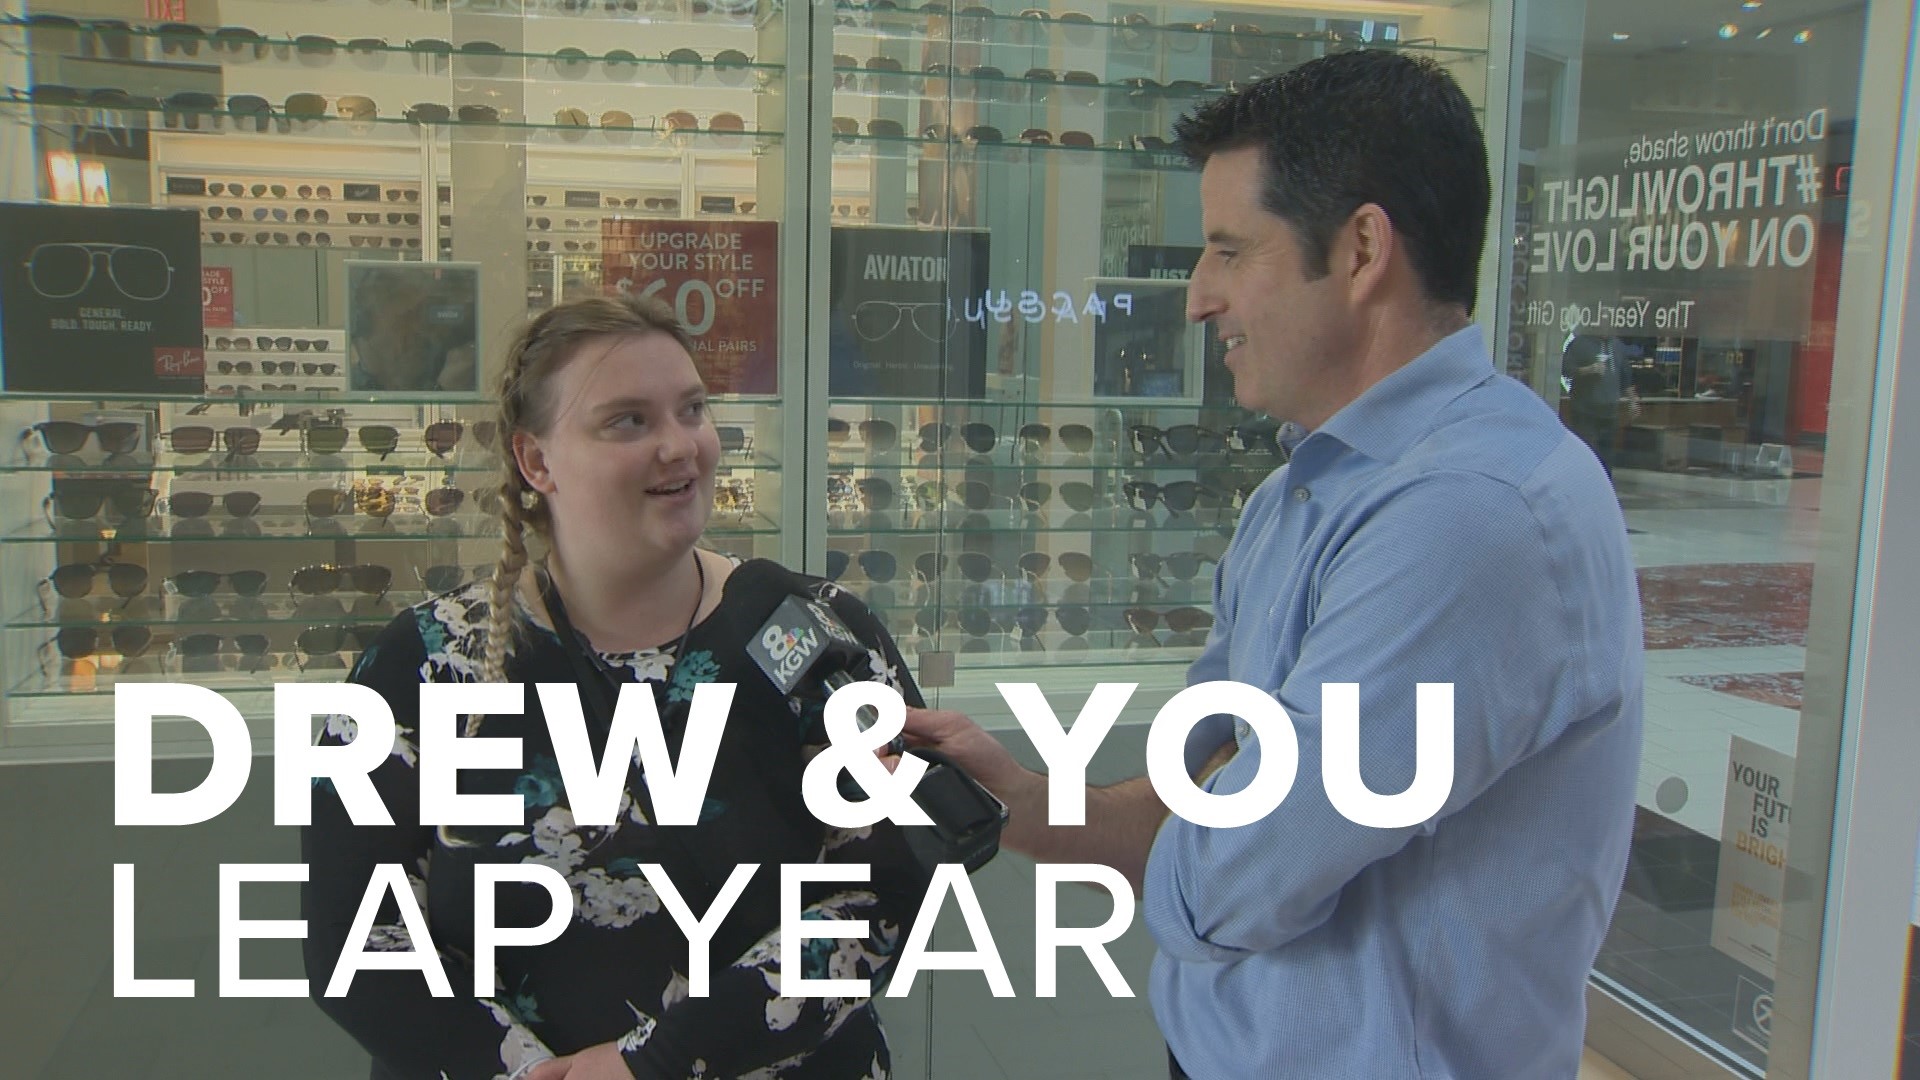 2020 is a leap year, which means the month of February has one extra day. But do you know why? Drew Carney visited the mall to test your leap year knowledge.